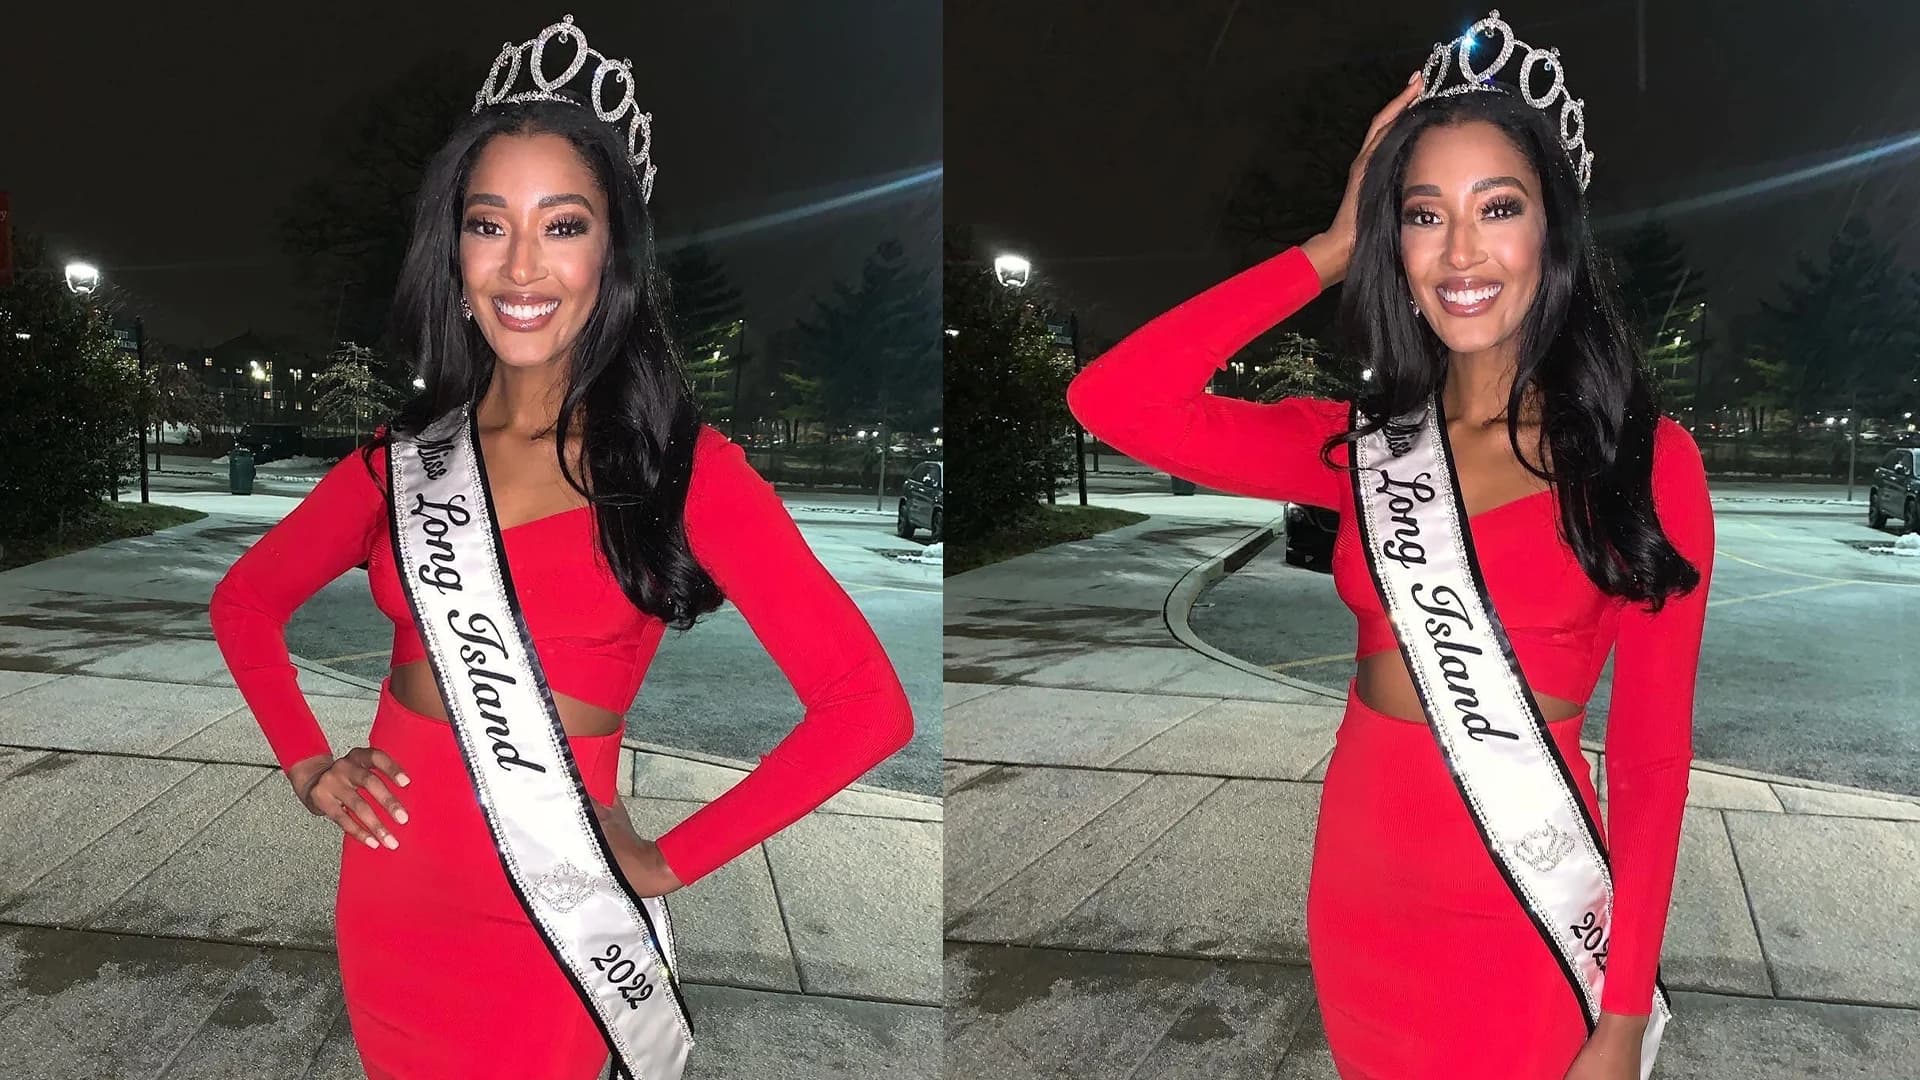 Miss Long Island 2022 hopes to 'reverse the stigma' during year with crown